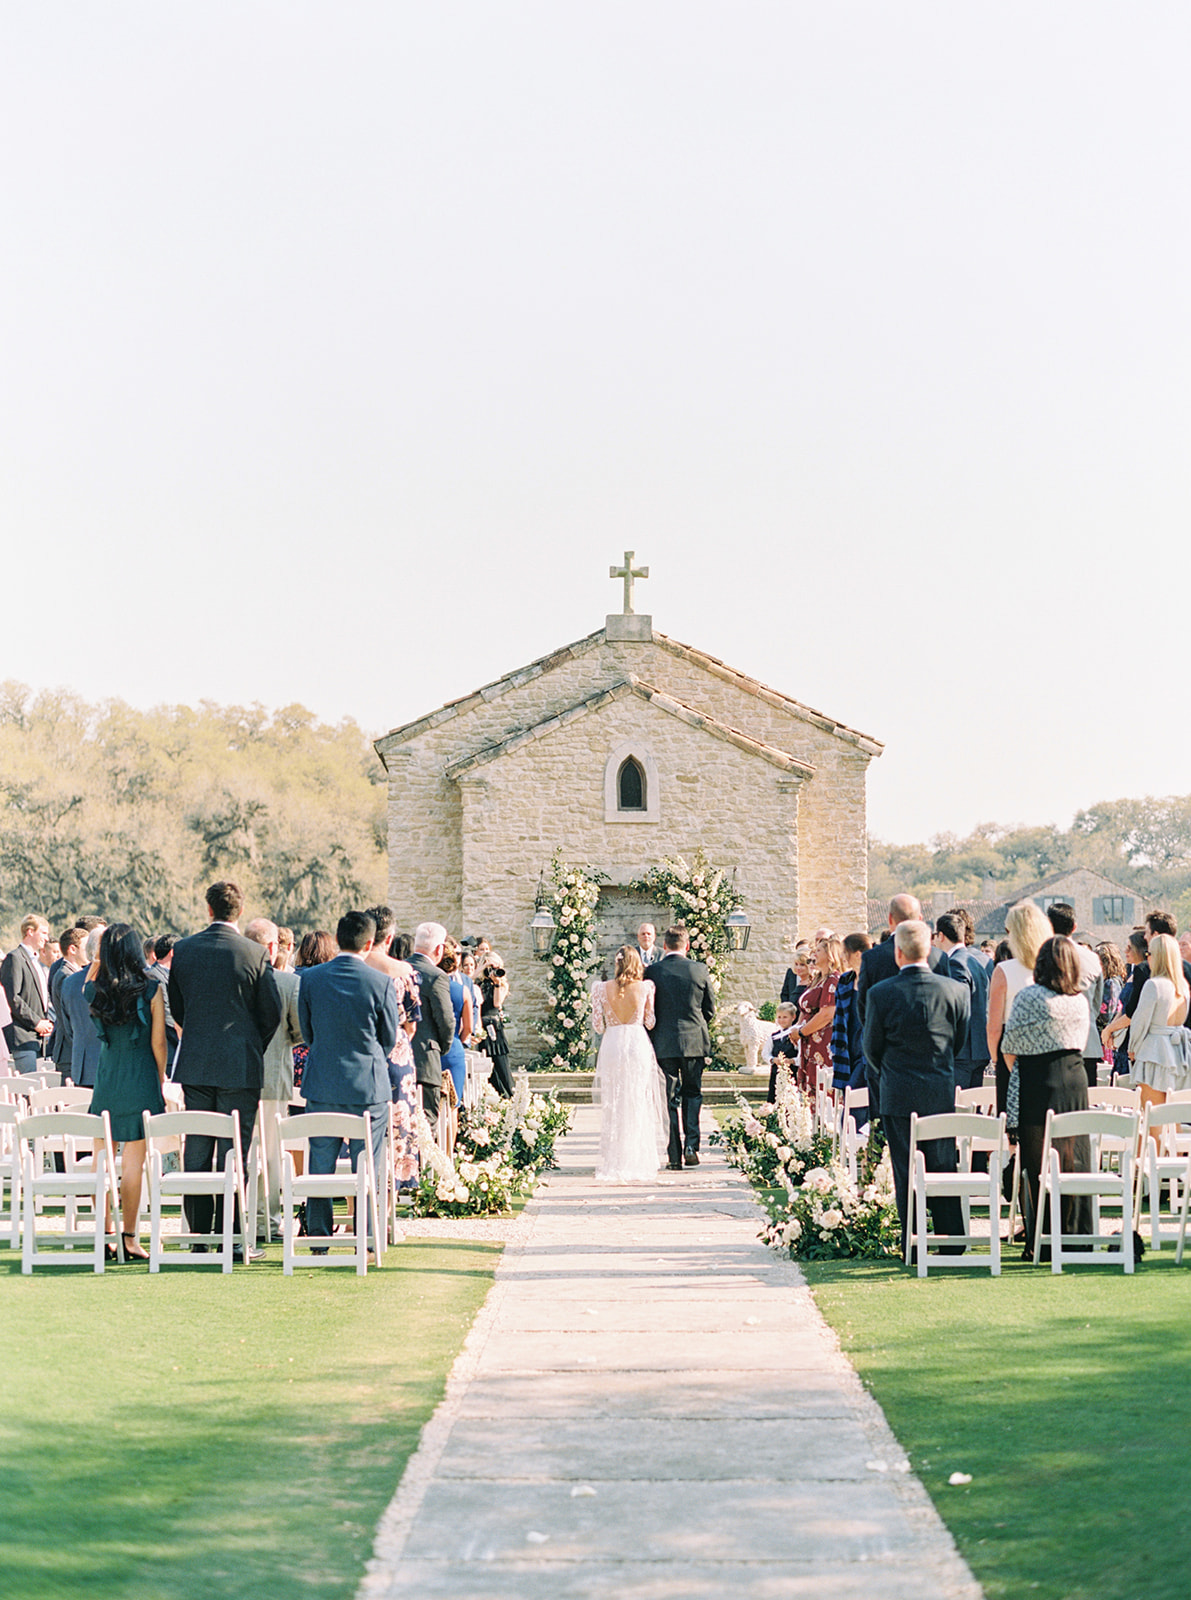 Bride and groom standing at the altar by the end of the aisle along with their wedding guests during their outdoor romantic chapel wedding